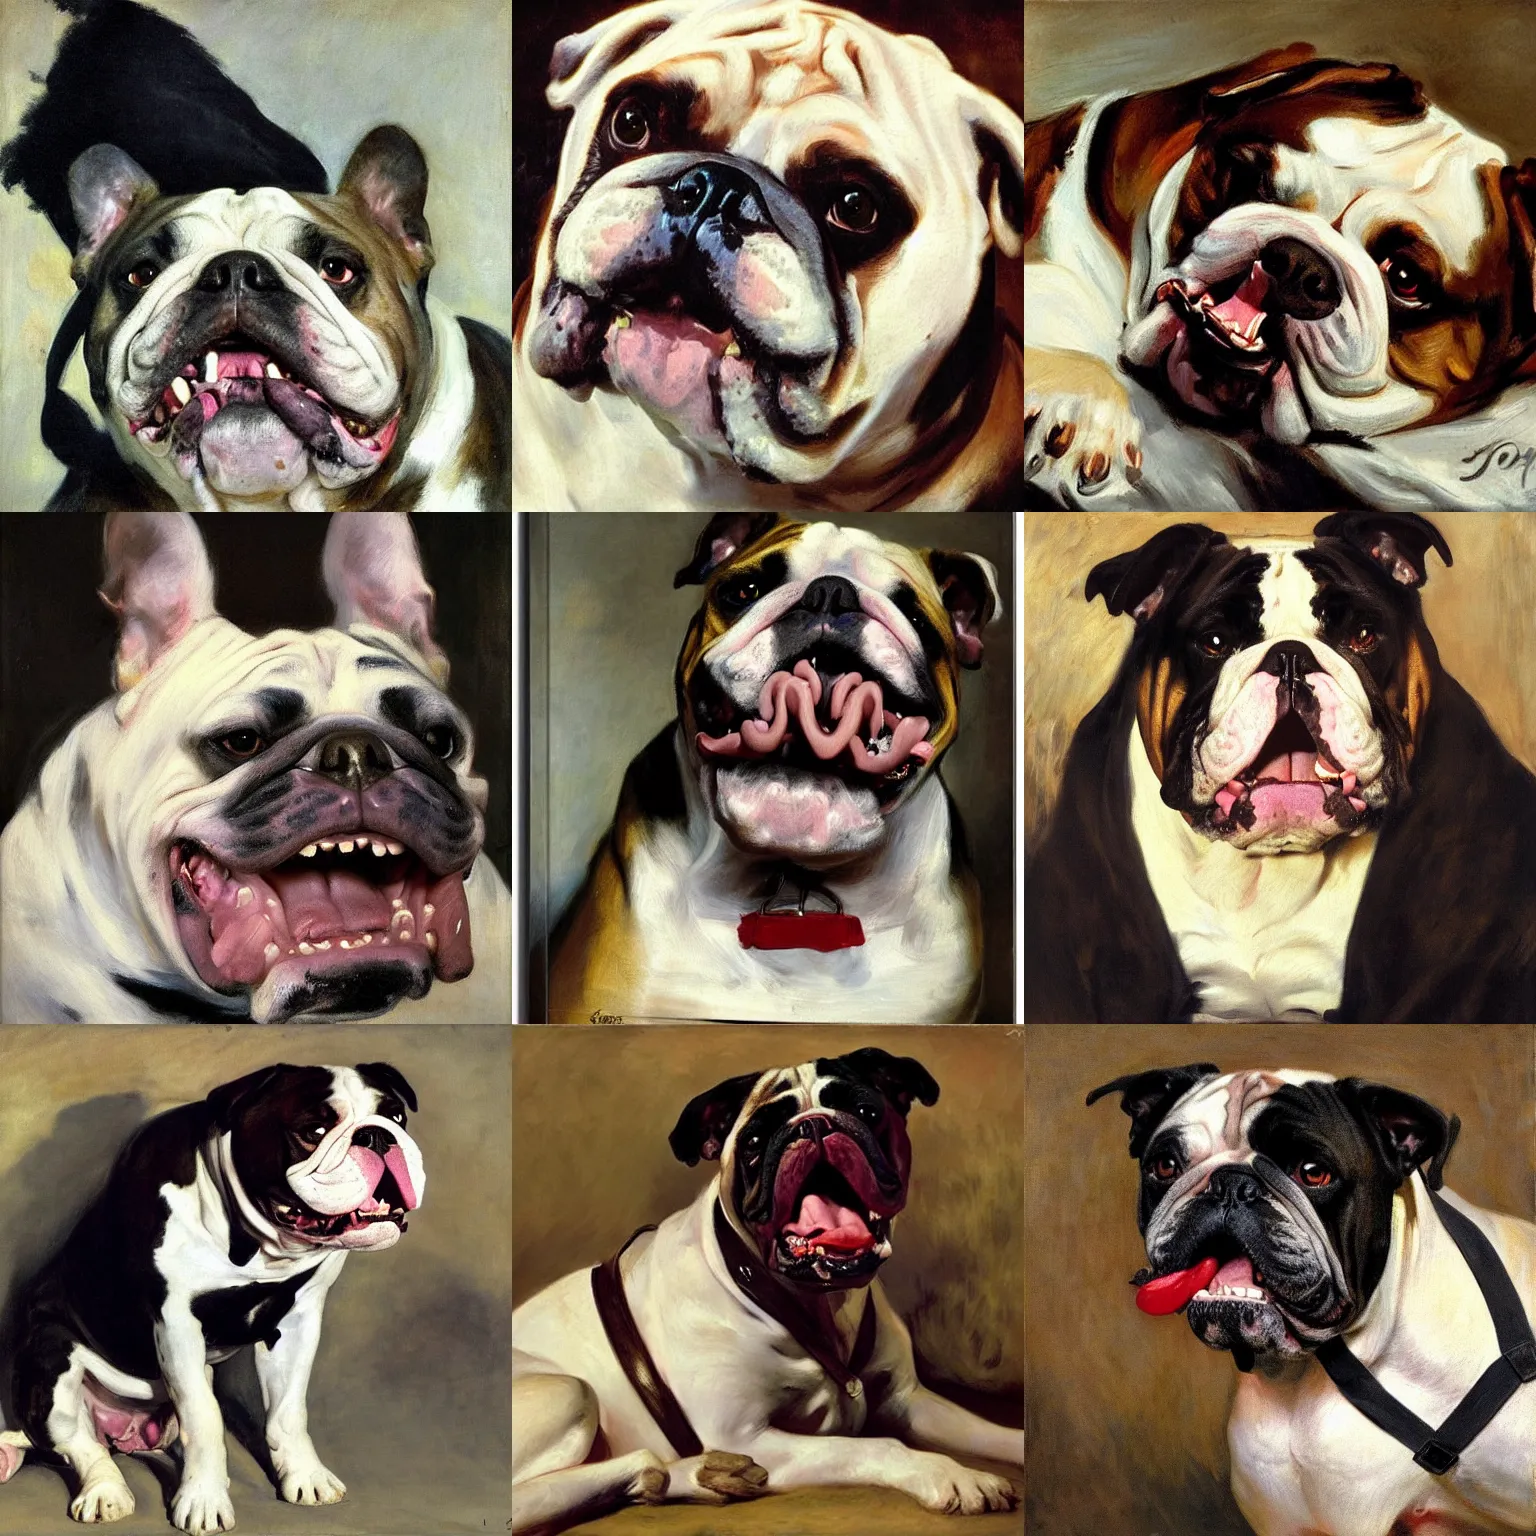 Prompt: bulldog, open mouth drooling, sleepy eyes, incredible details, masterful technique, portrait painting by John Singer Sargent + Hero Johnson + Manet